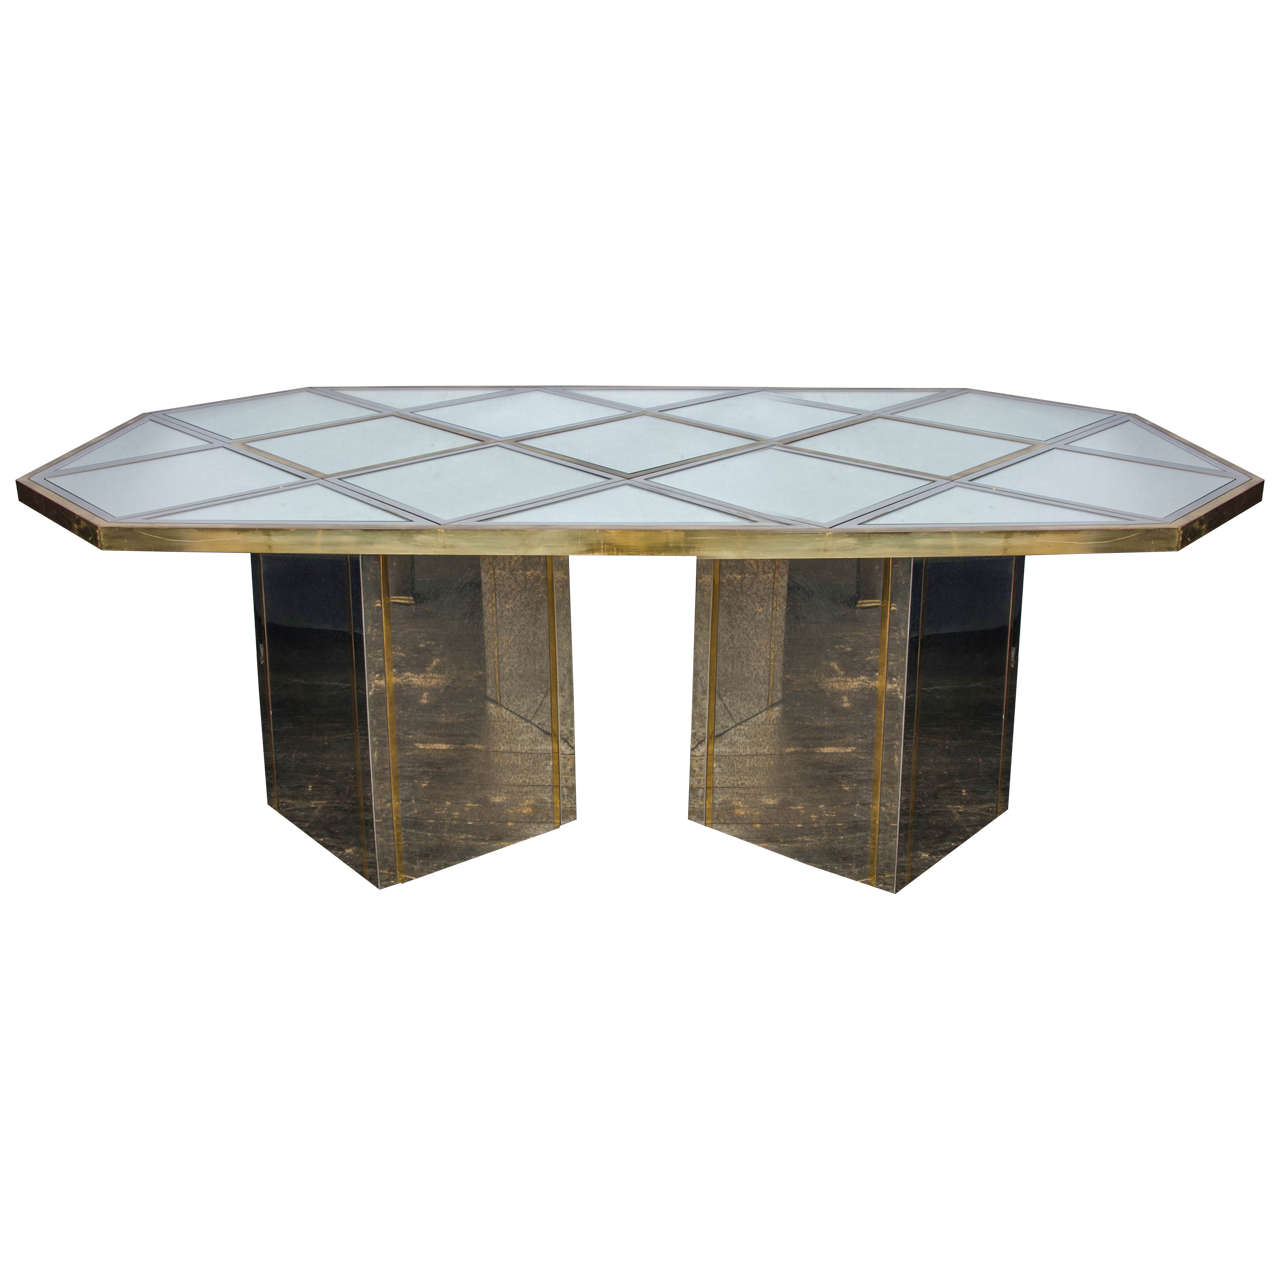 1960s Italian Unusual Large Dining Table For Sale